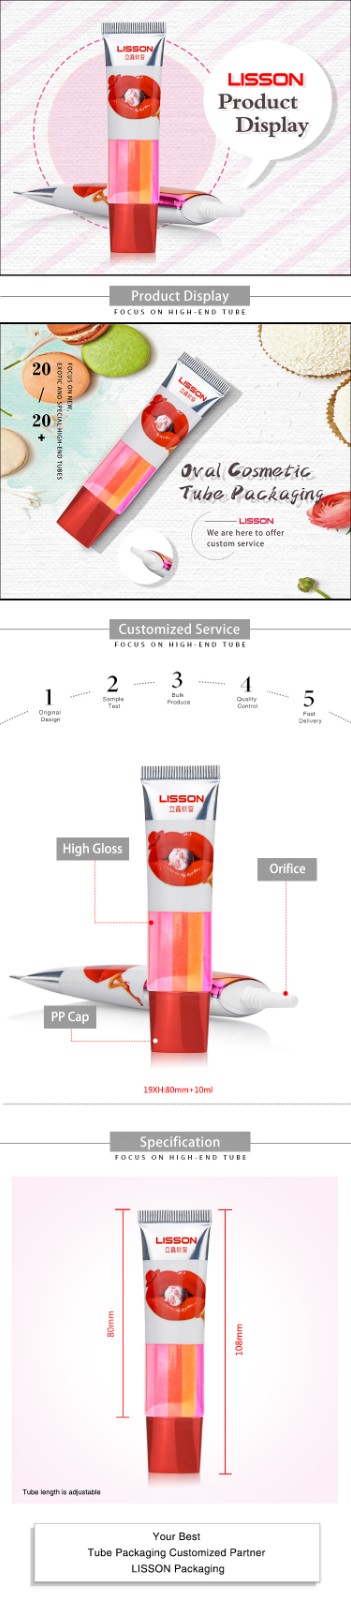 Lisson empty squeeze tubes for cosmetics applicator for makeup